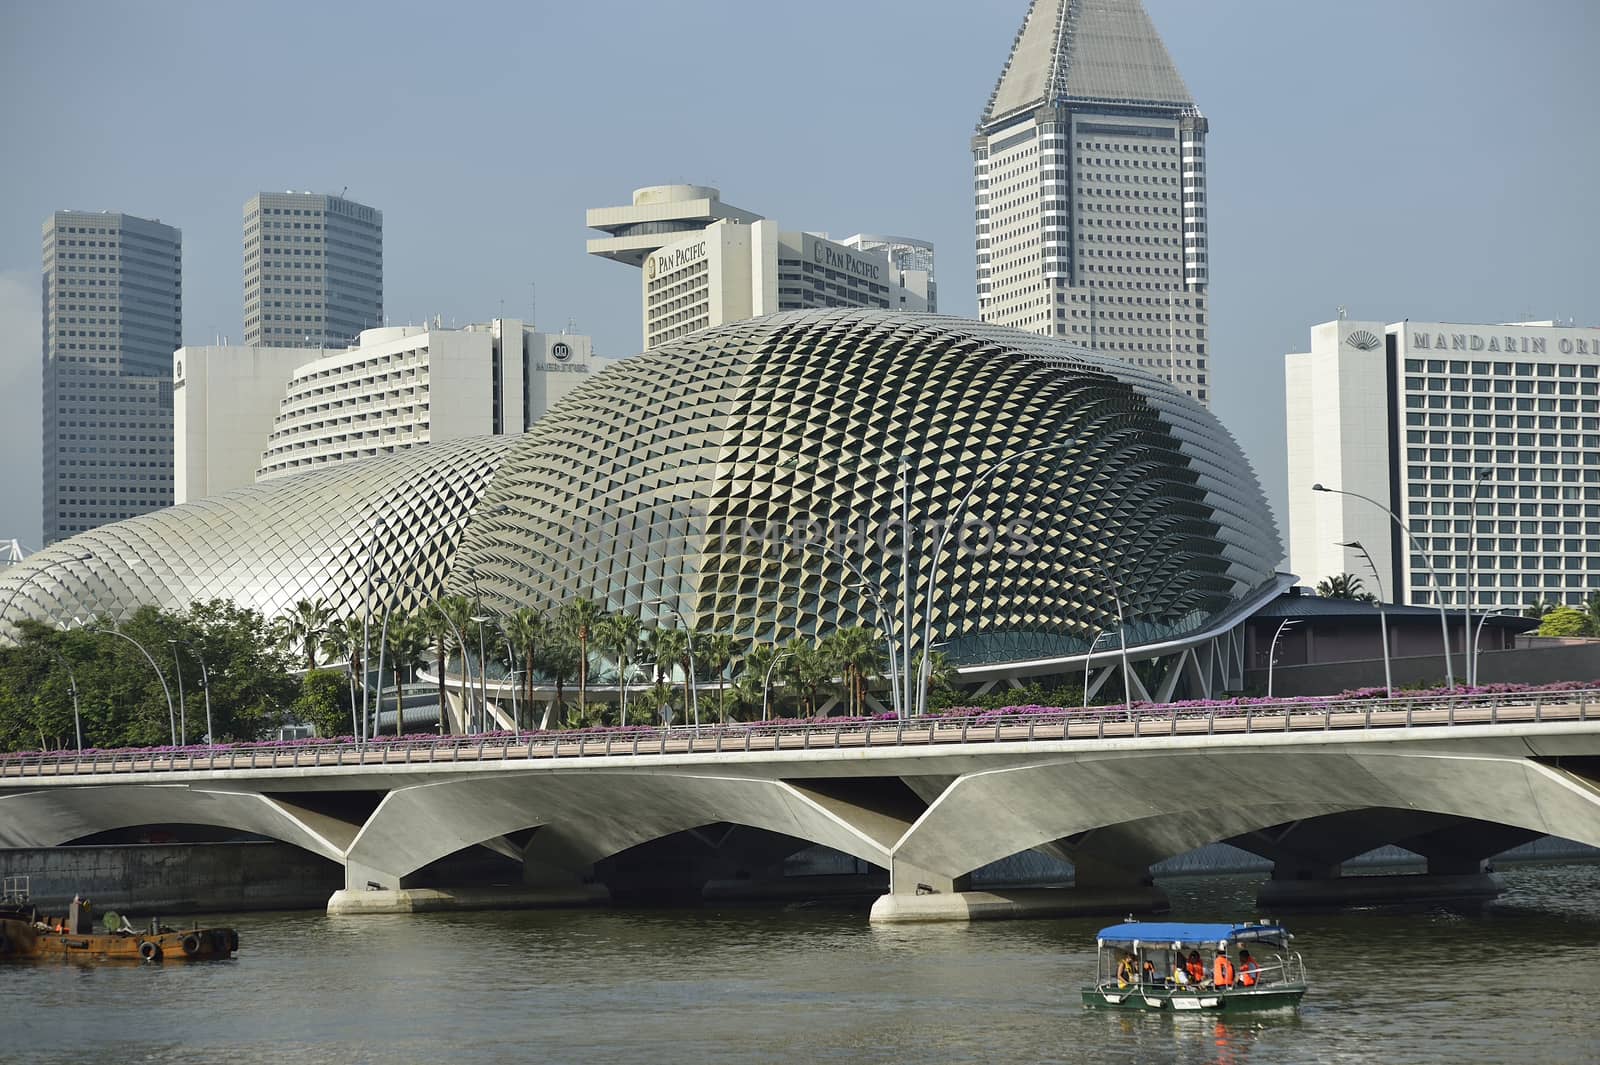 Located at Waterfront, Marina Bay, mouth of Singapore River. The Esplanade is a world renowned performing arts centre. Its twin domes are nicknamed as the Durian